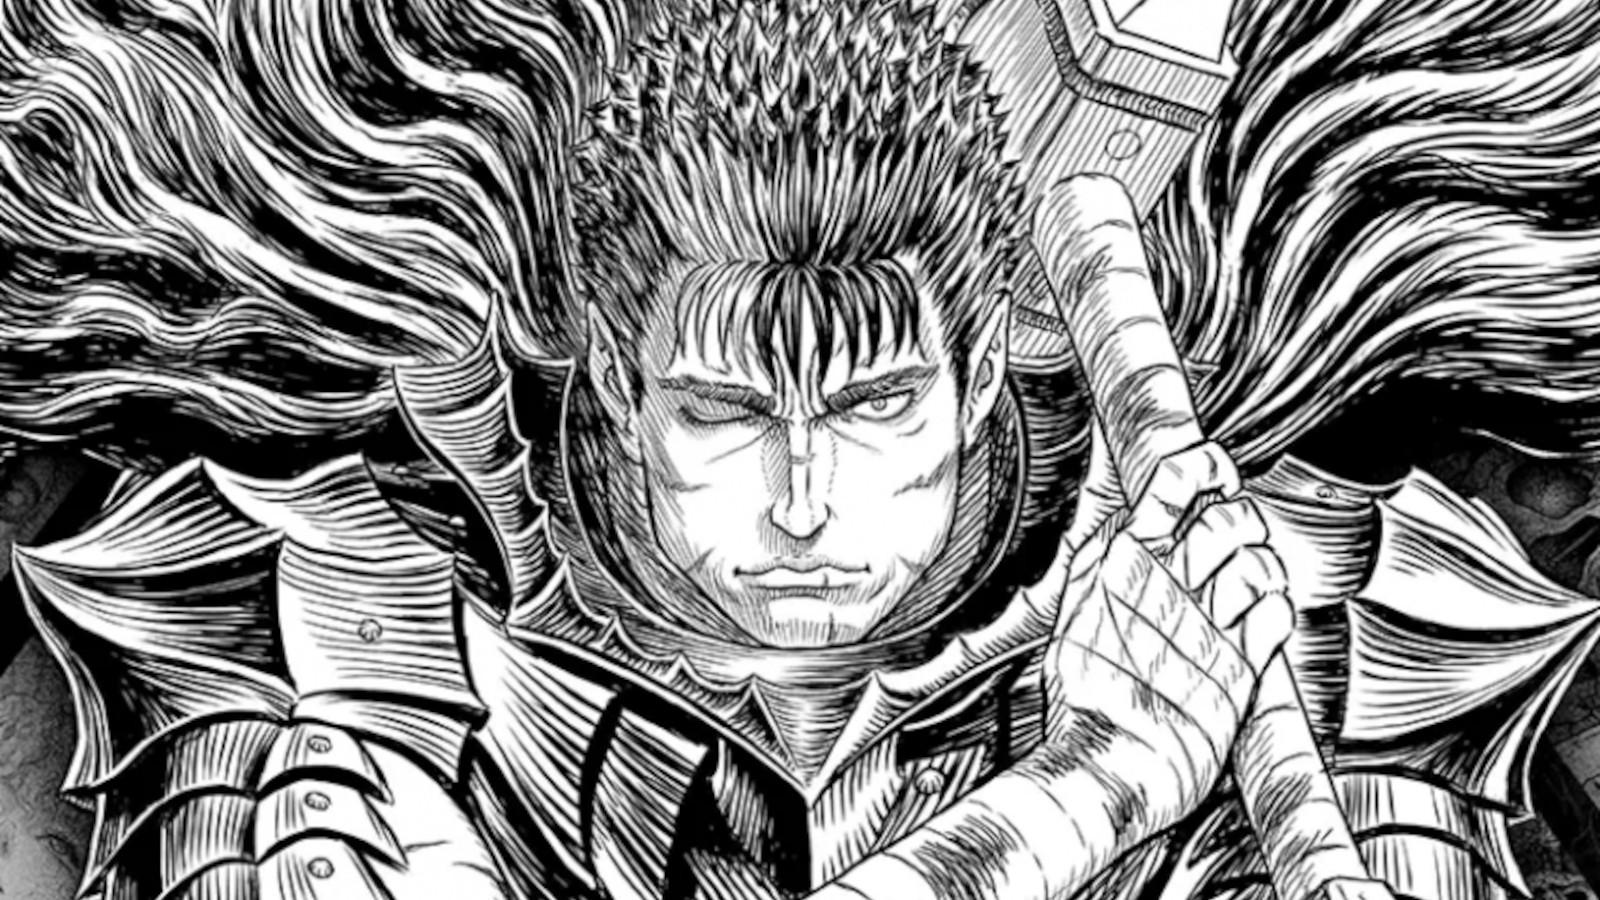 Get 13 Berserk Deluxe Edition mangas for a ridiculously low price - Dexerto